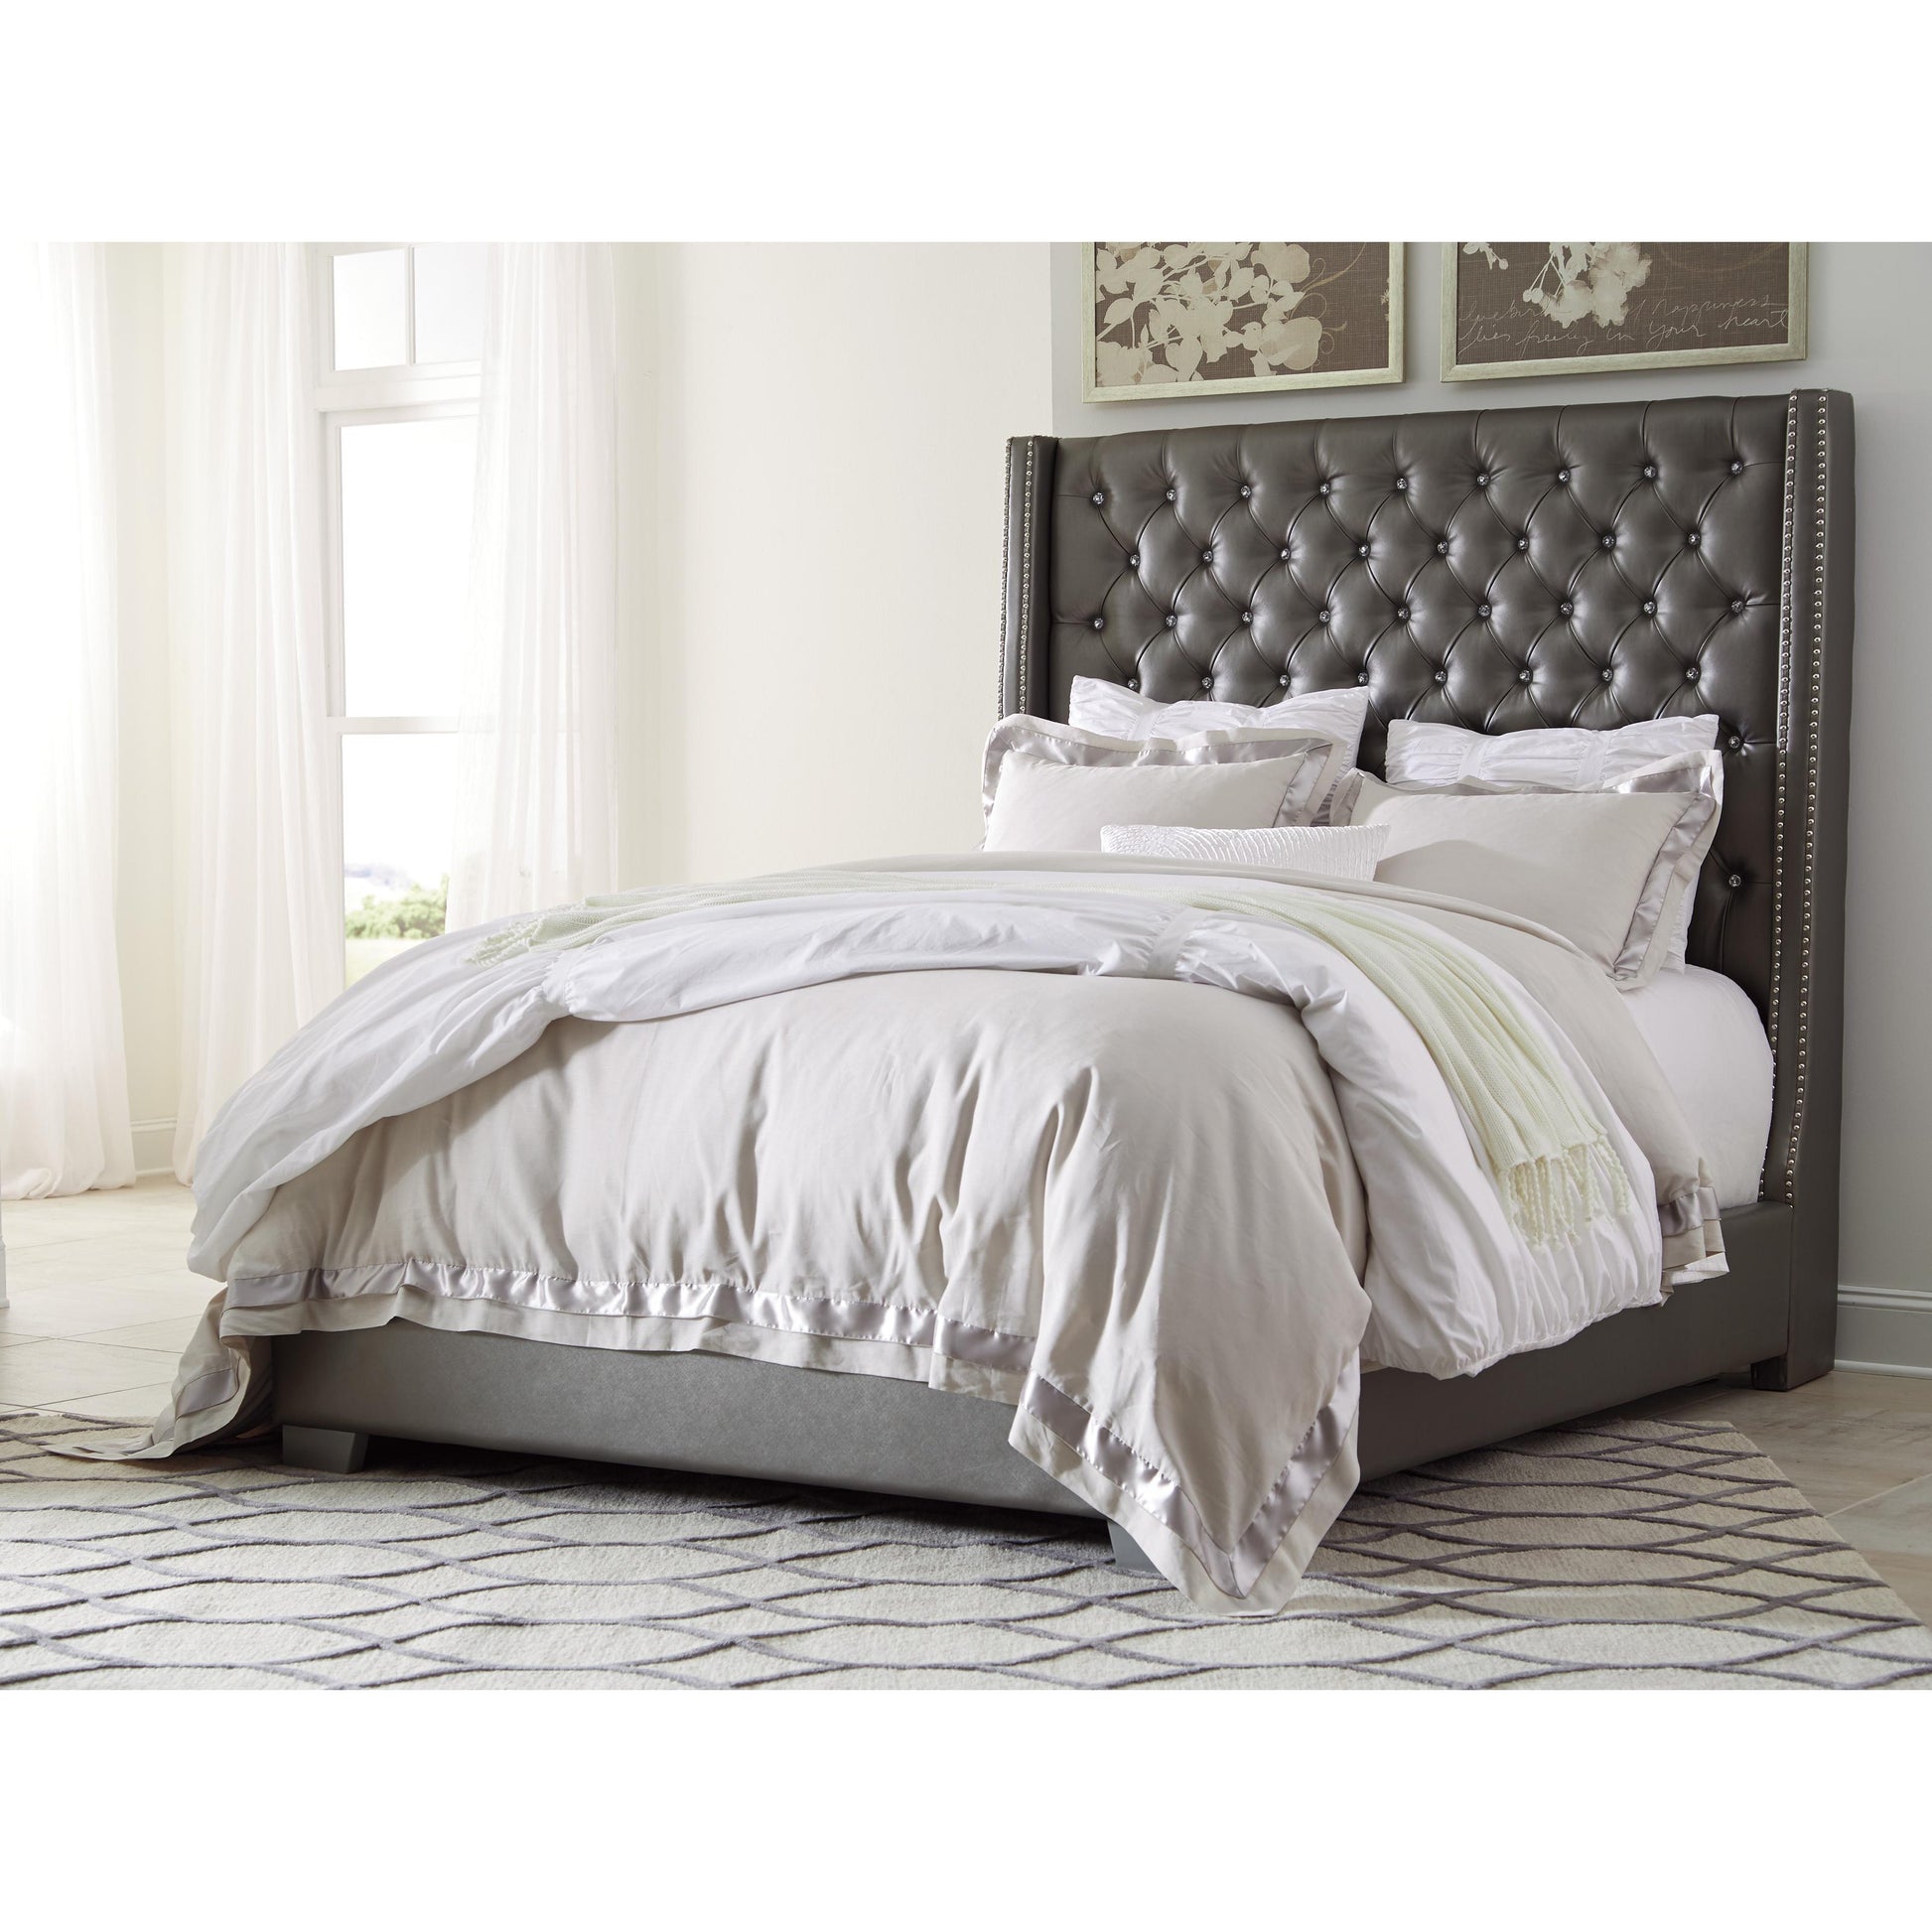 Signature Design by Ashley Coralayne Queen Upholstered Bed B650-77/B650-74